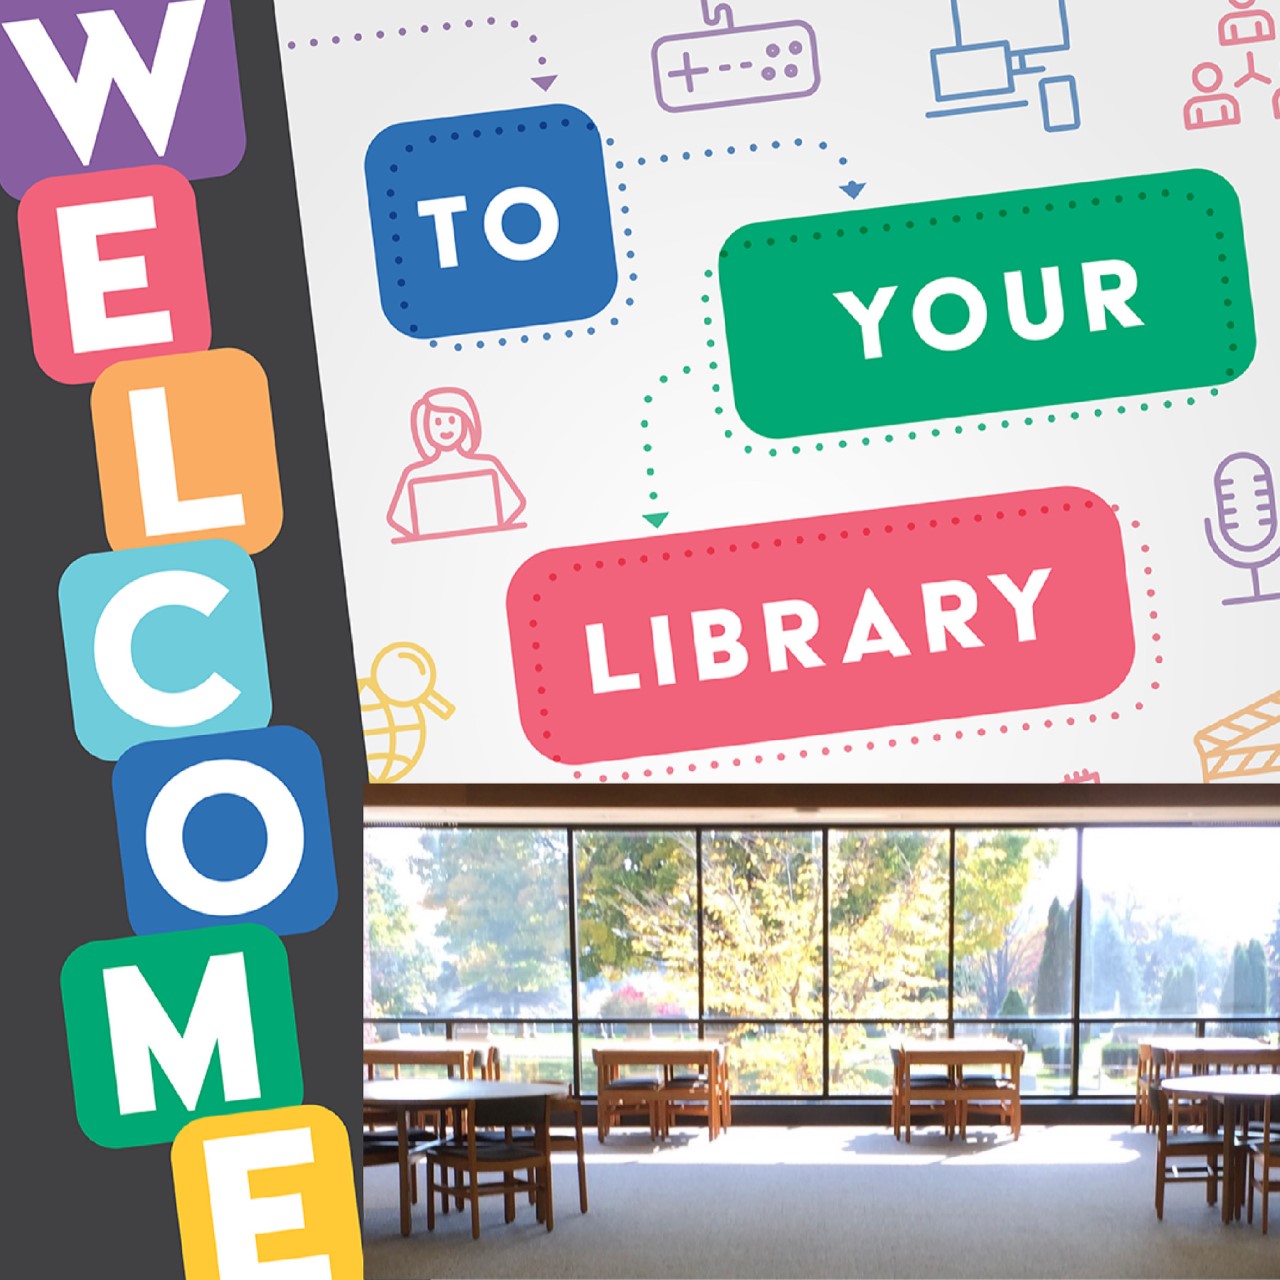 Image of library interior and text saying welcome to your library